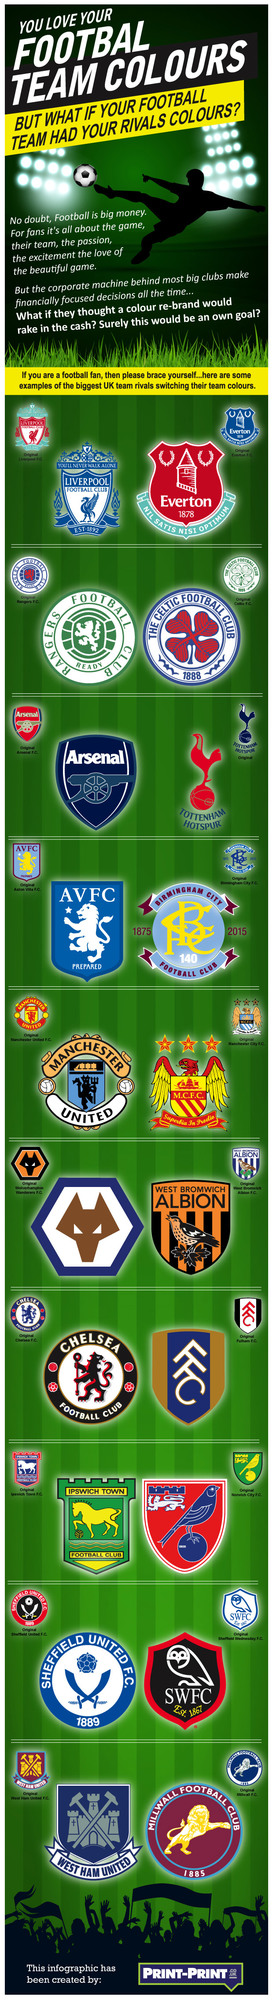 Your footbal team in rival team colours